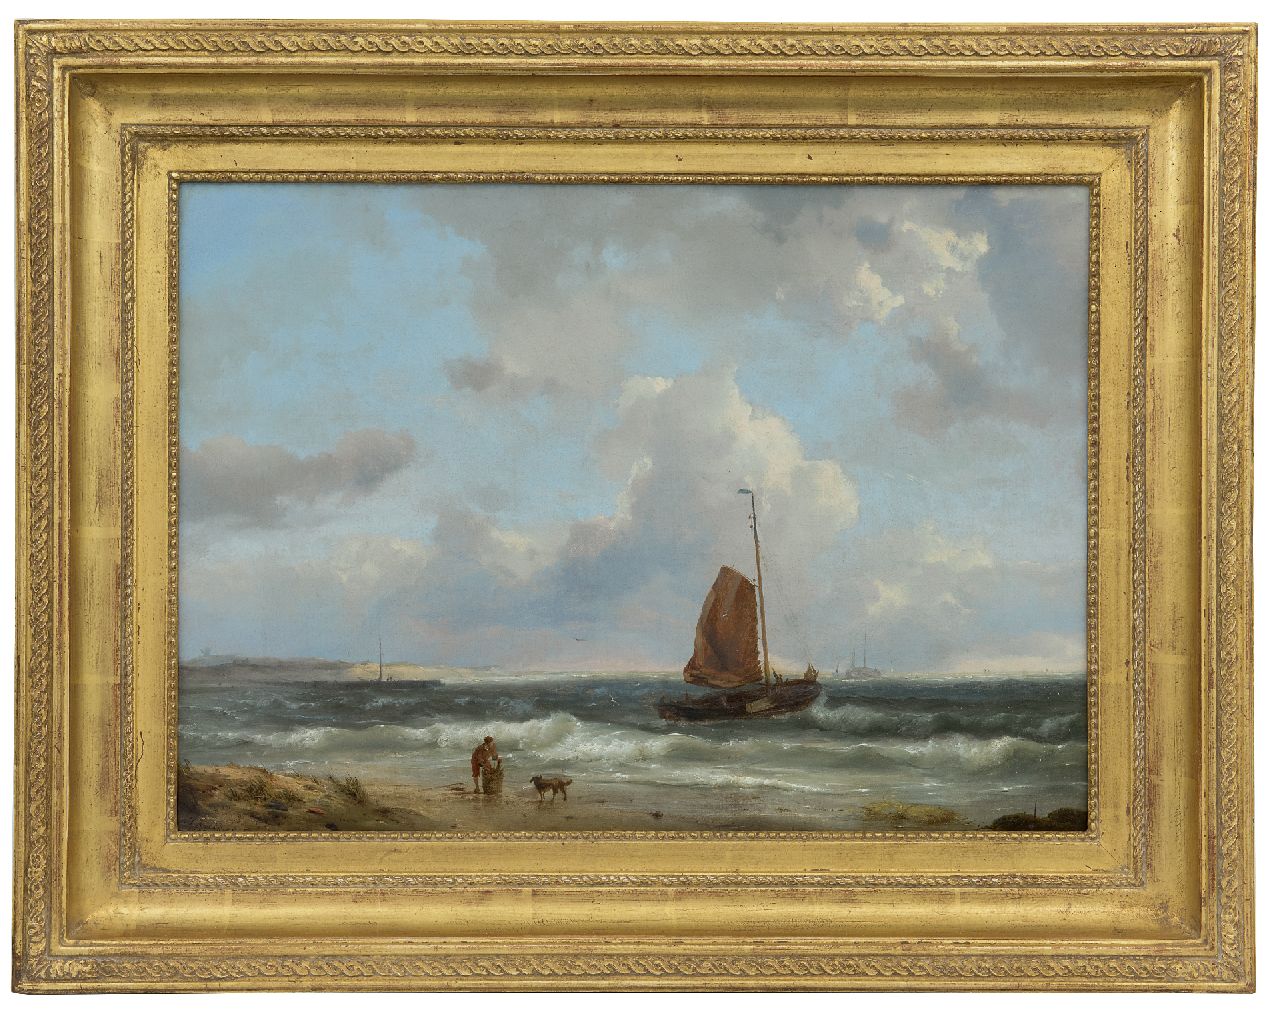 Koekkoek H.  | Hermanus Koekkoek | Paintings offered for sale | A fishing boat setting sail, oil on canvas 34.7 x 48.3 cm, signed l.l. and dated 1849